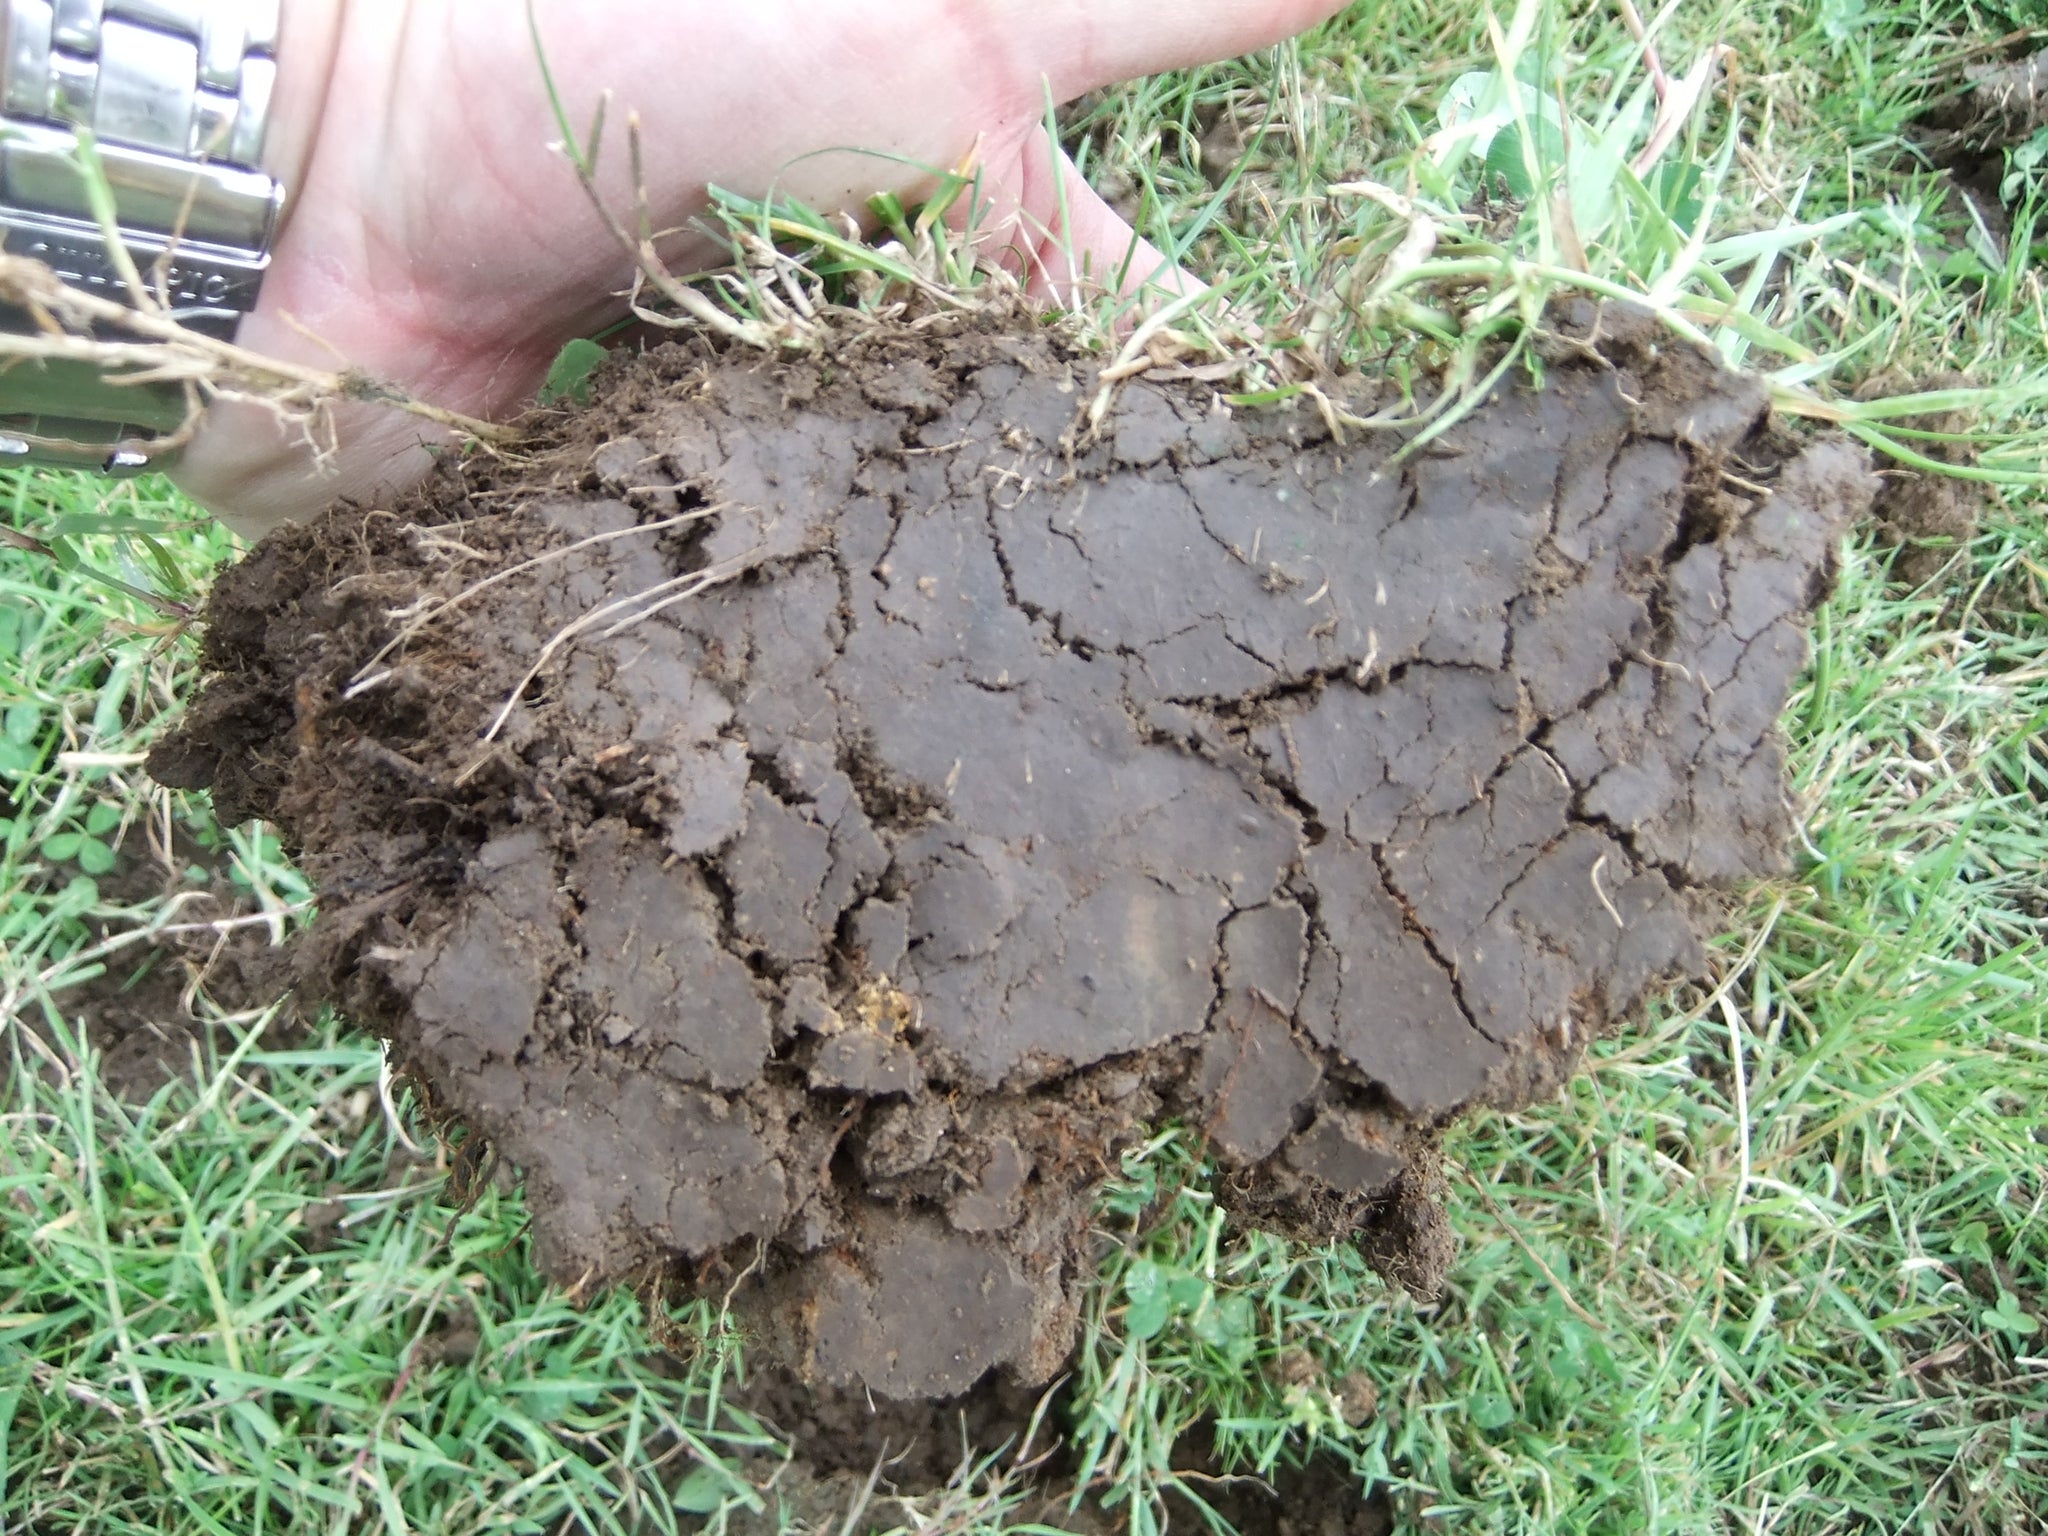 How a Groundhog Aerator can promote root depth in your pasture